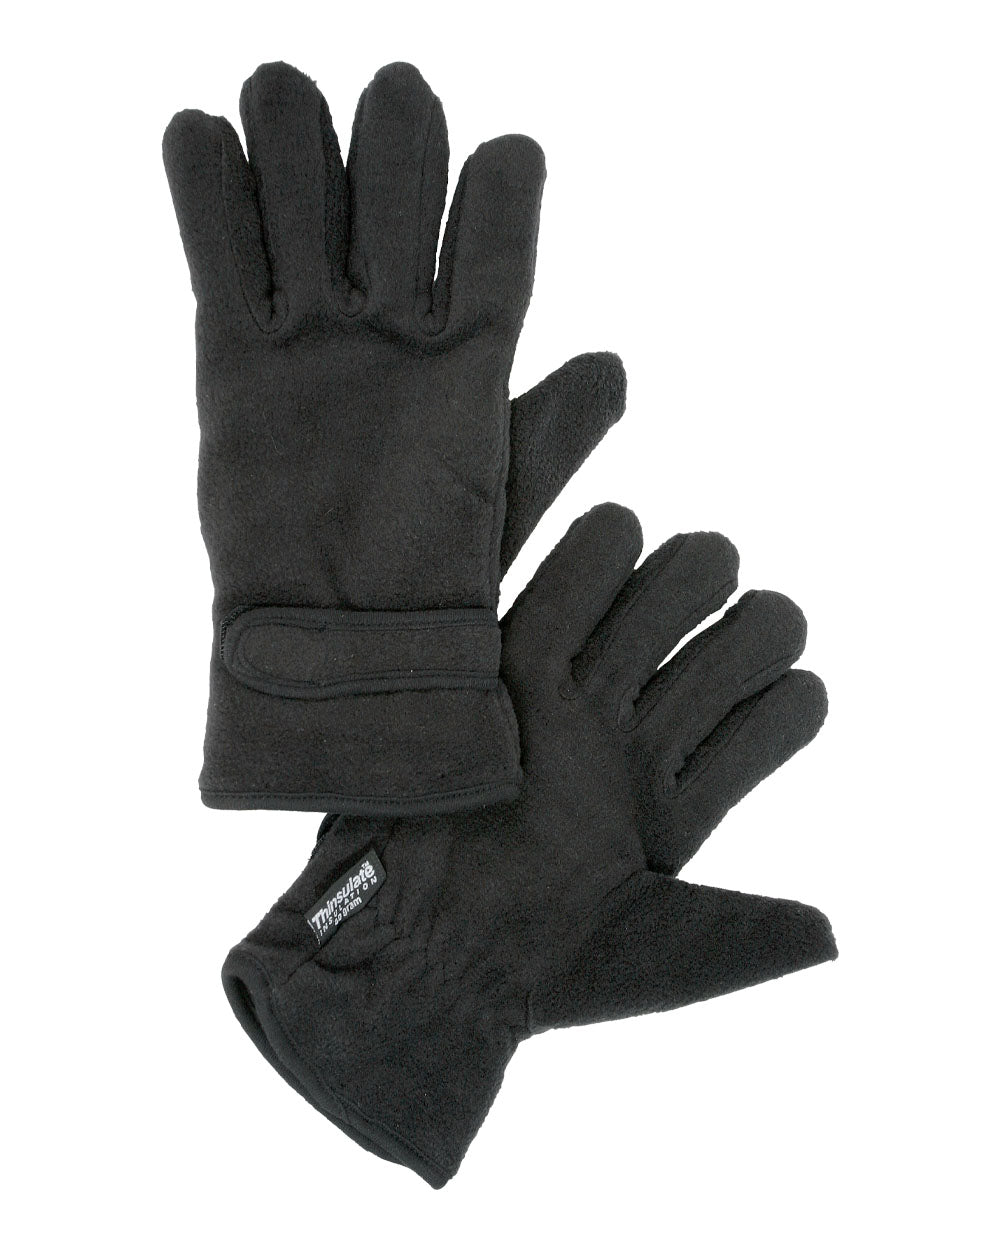 Black coloured Fort Thinsulate Fleece Glove on White background